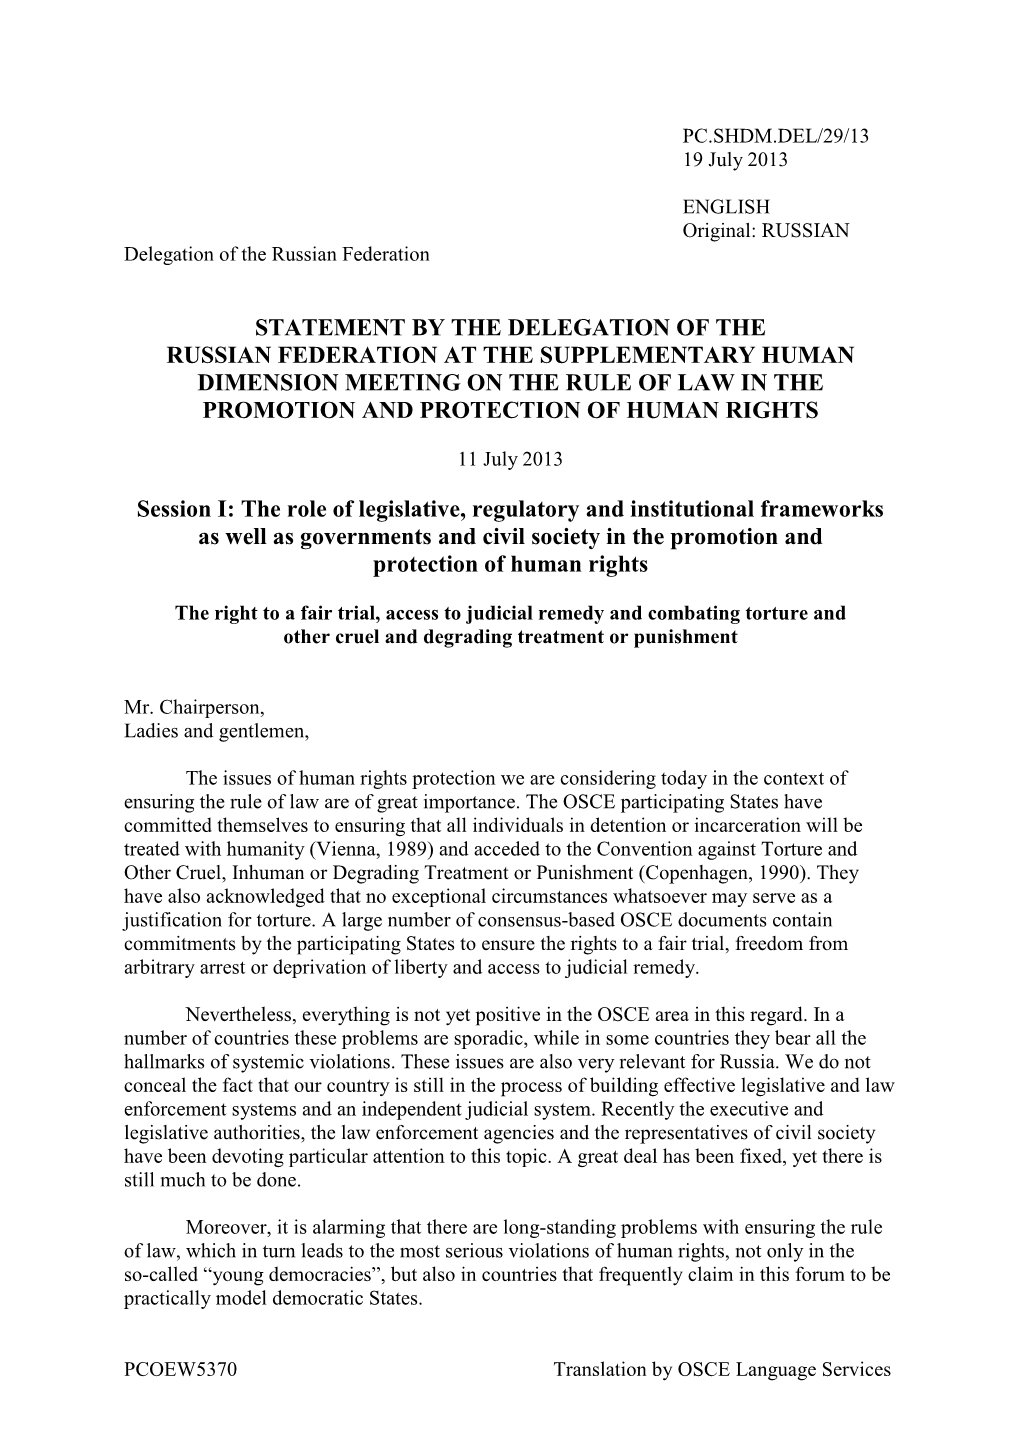 Statement by the Delegation of the Russian Federation at the Supplementary Human Dimension Meeting on the Rule of Law in the Promotion and Protection of Human Rights